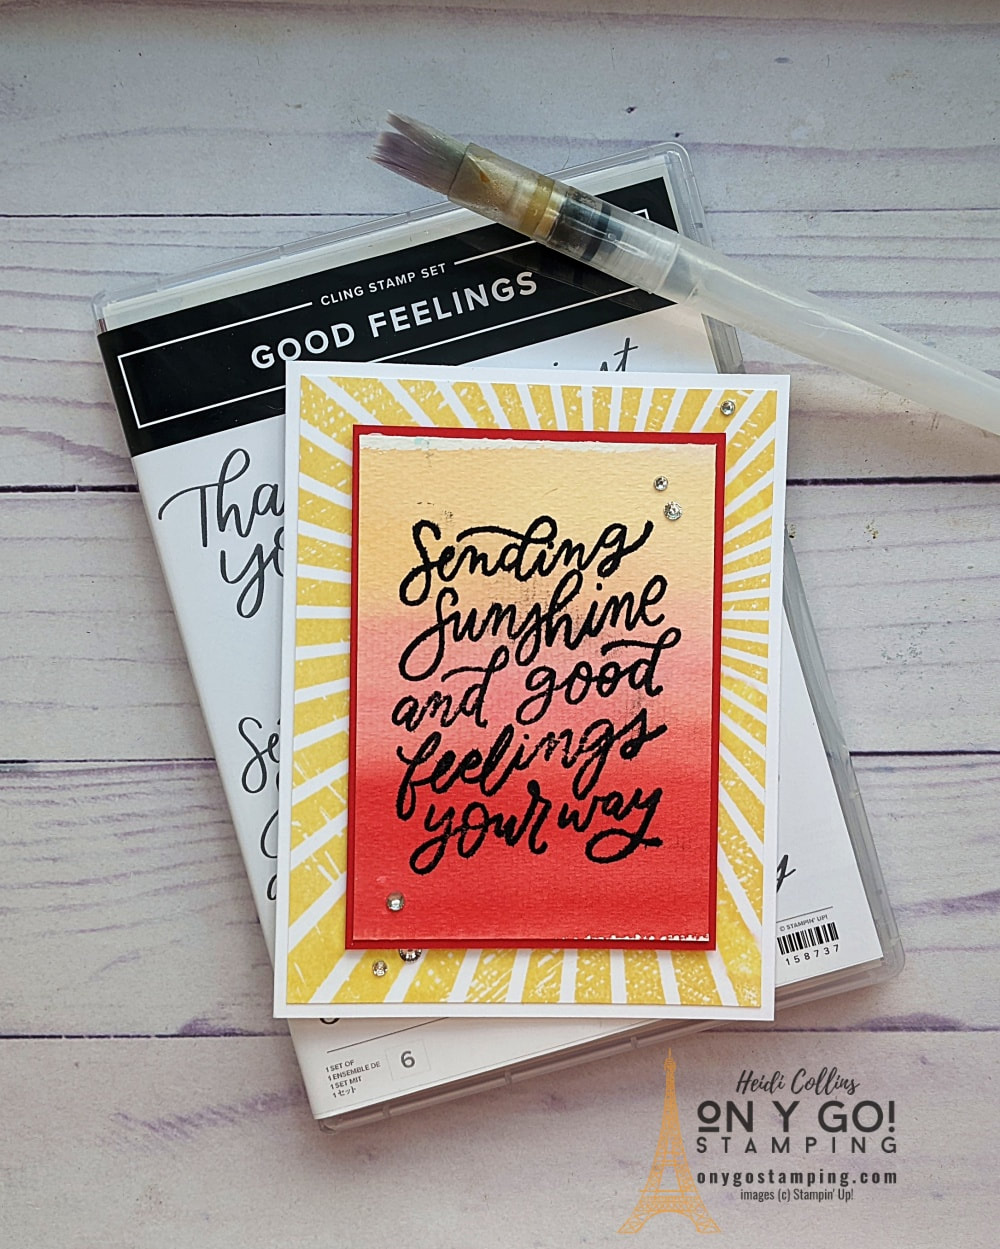 Send sunshine with the Good Feelings stamp set from Stampin' Up!® and a simple watercolor background.